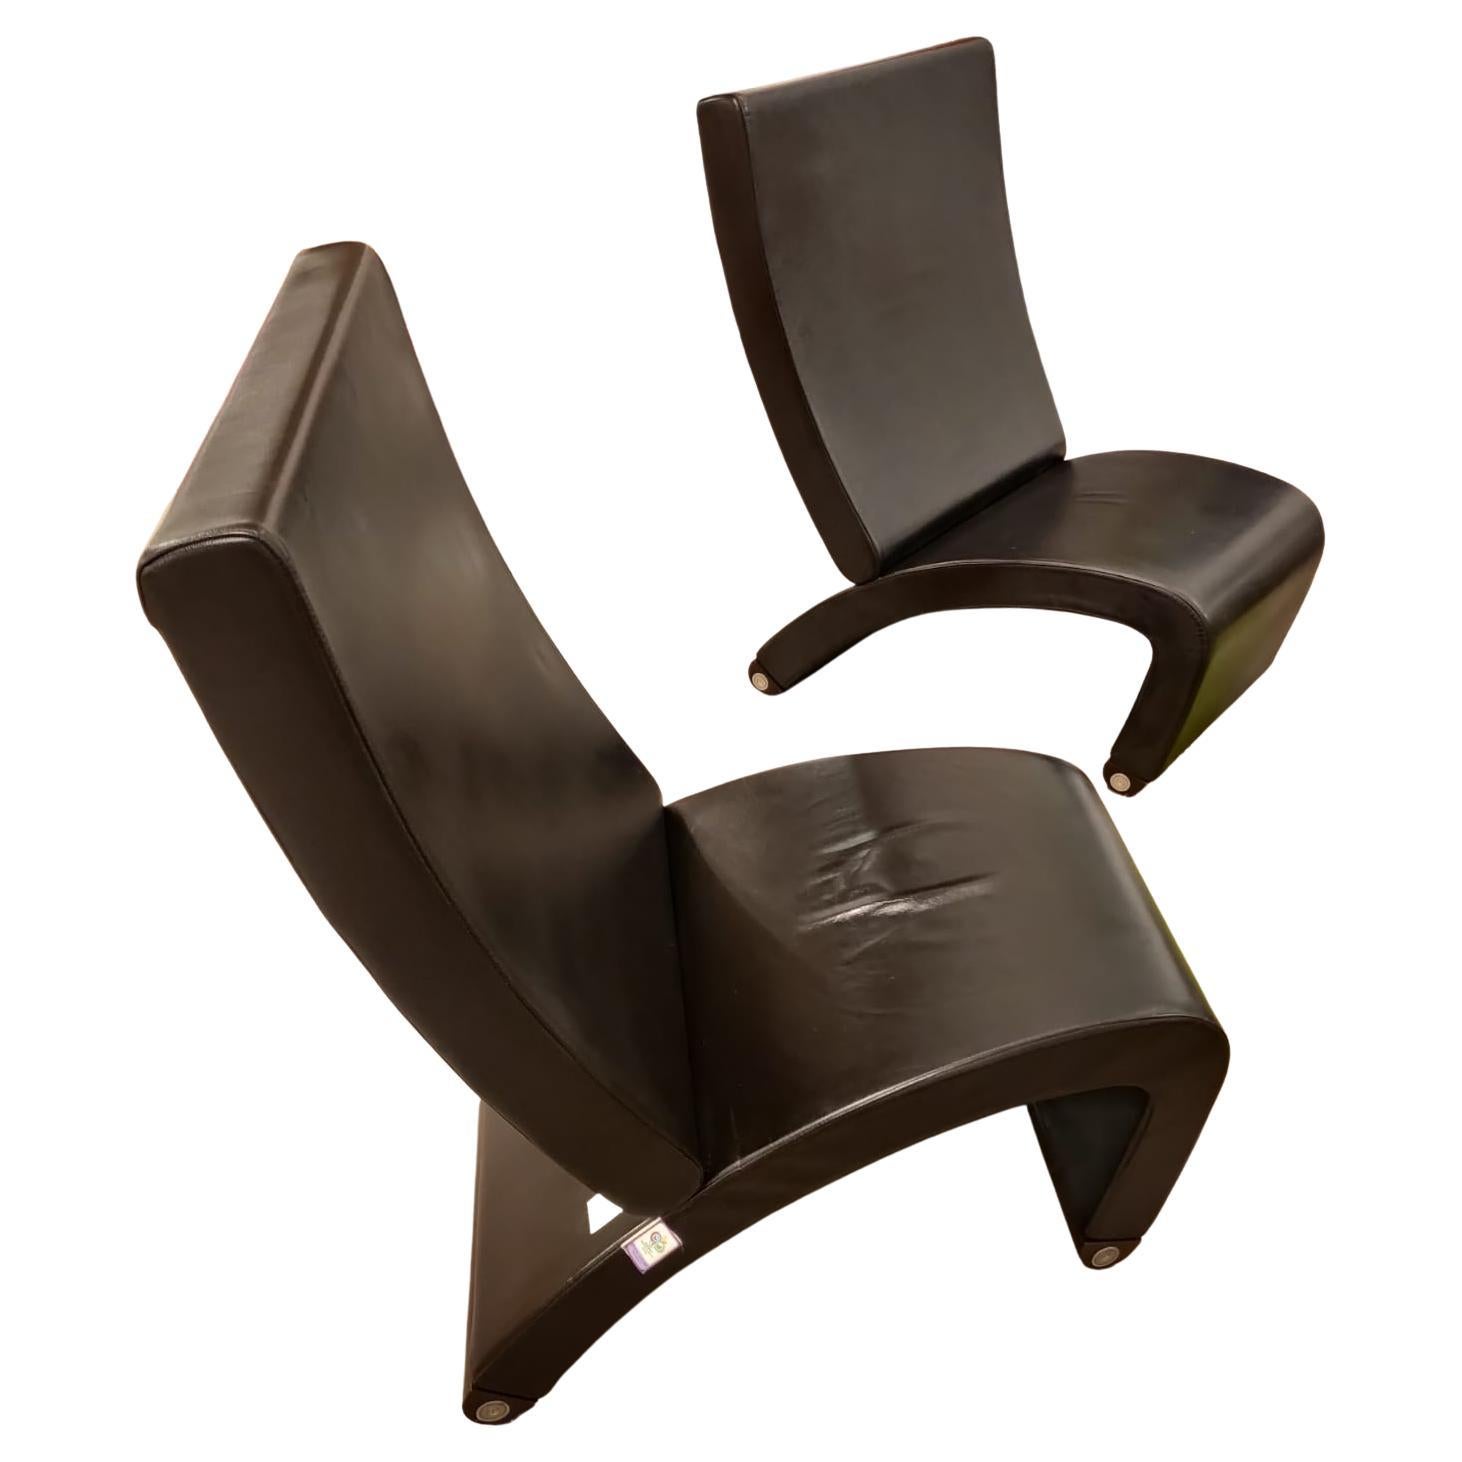 Pair of Official World Cup Soccer 2006 Leather Chairs by Selva, Italy